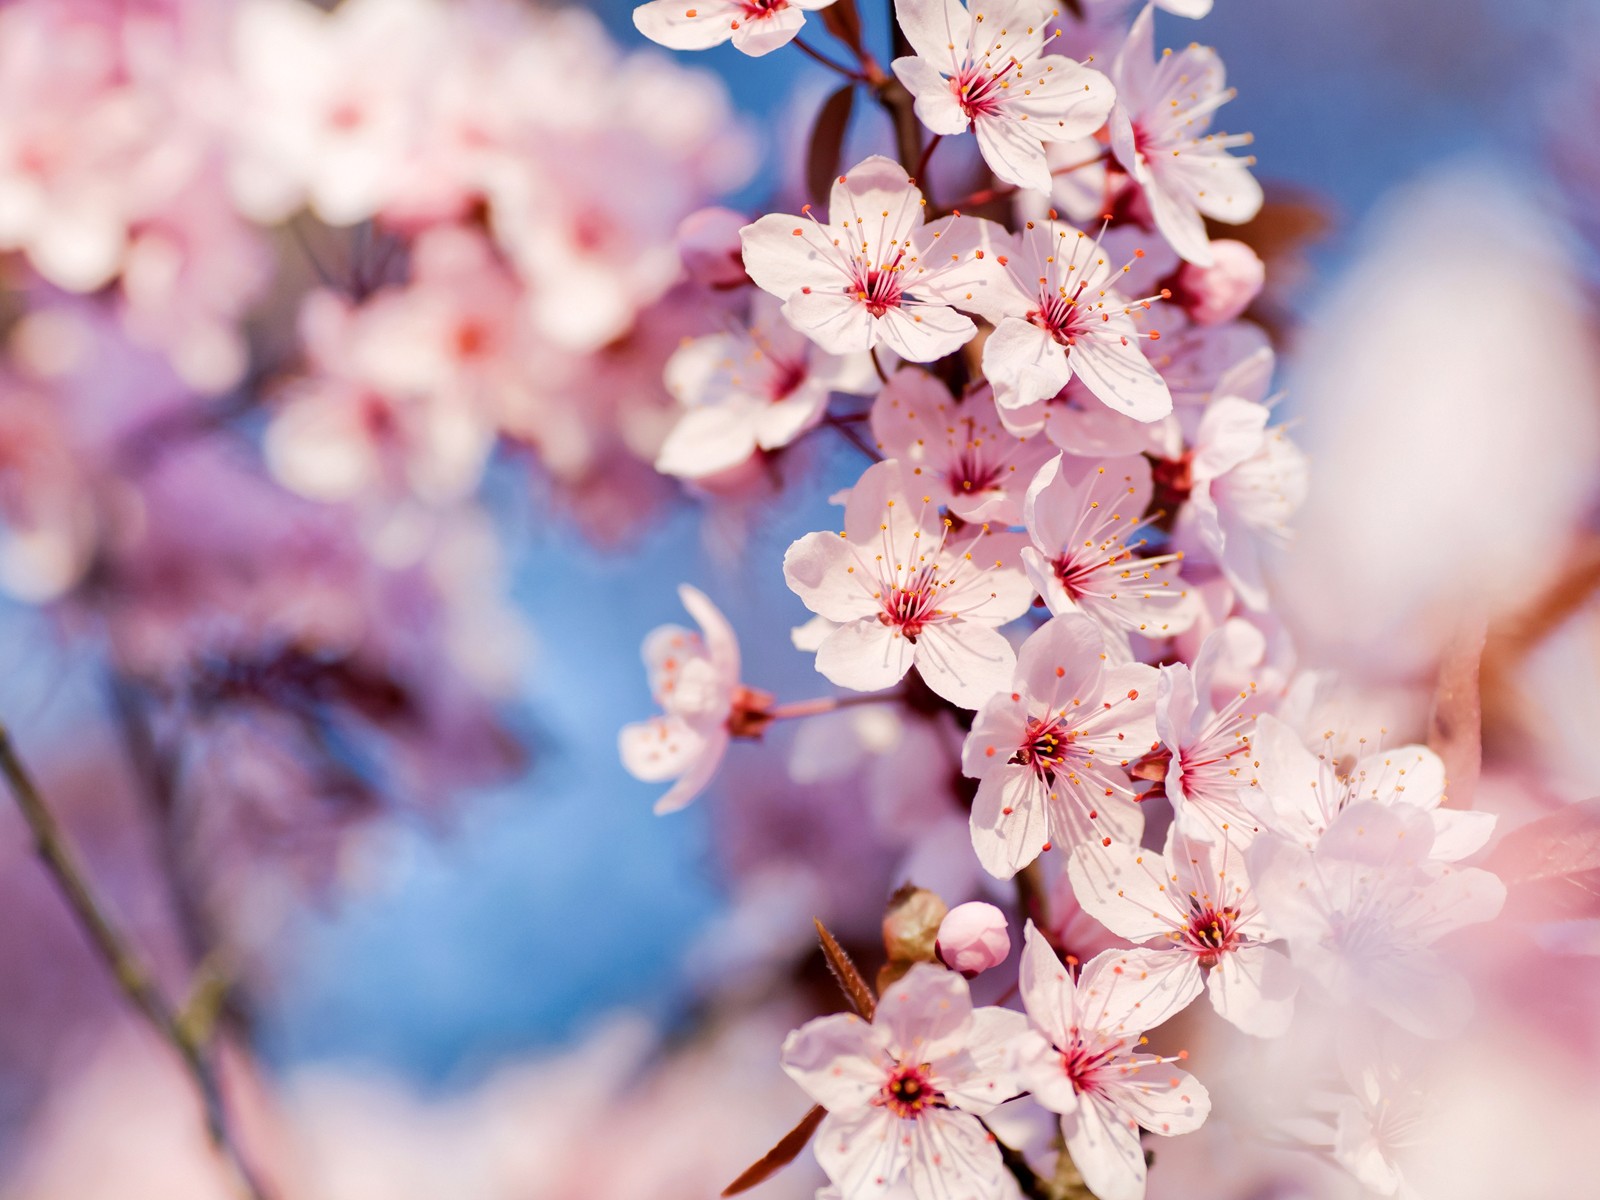 nature cherry blossoms flowers macro pink flowers focused wallpaper background